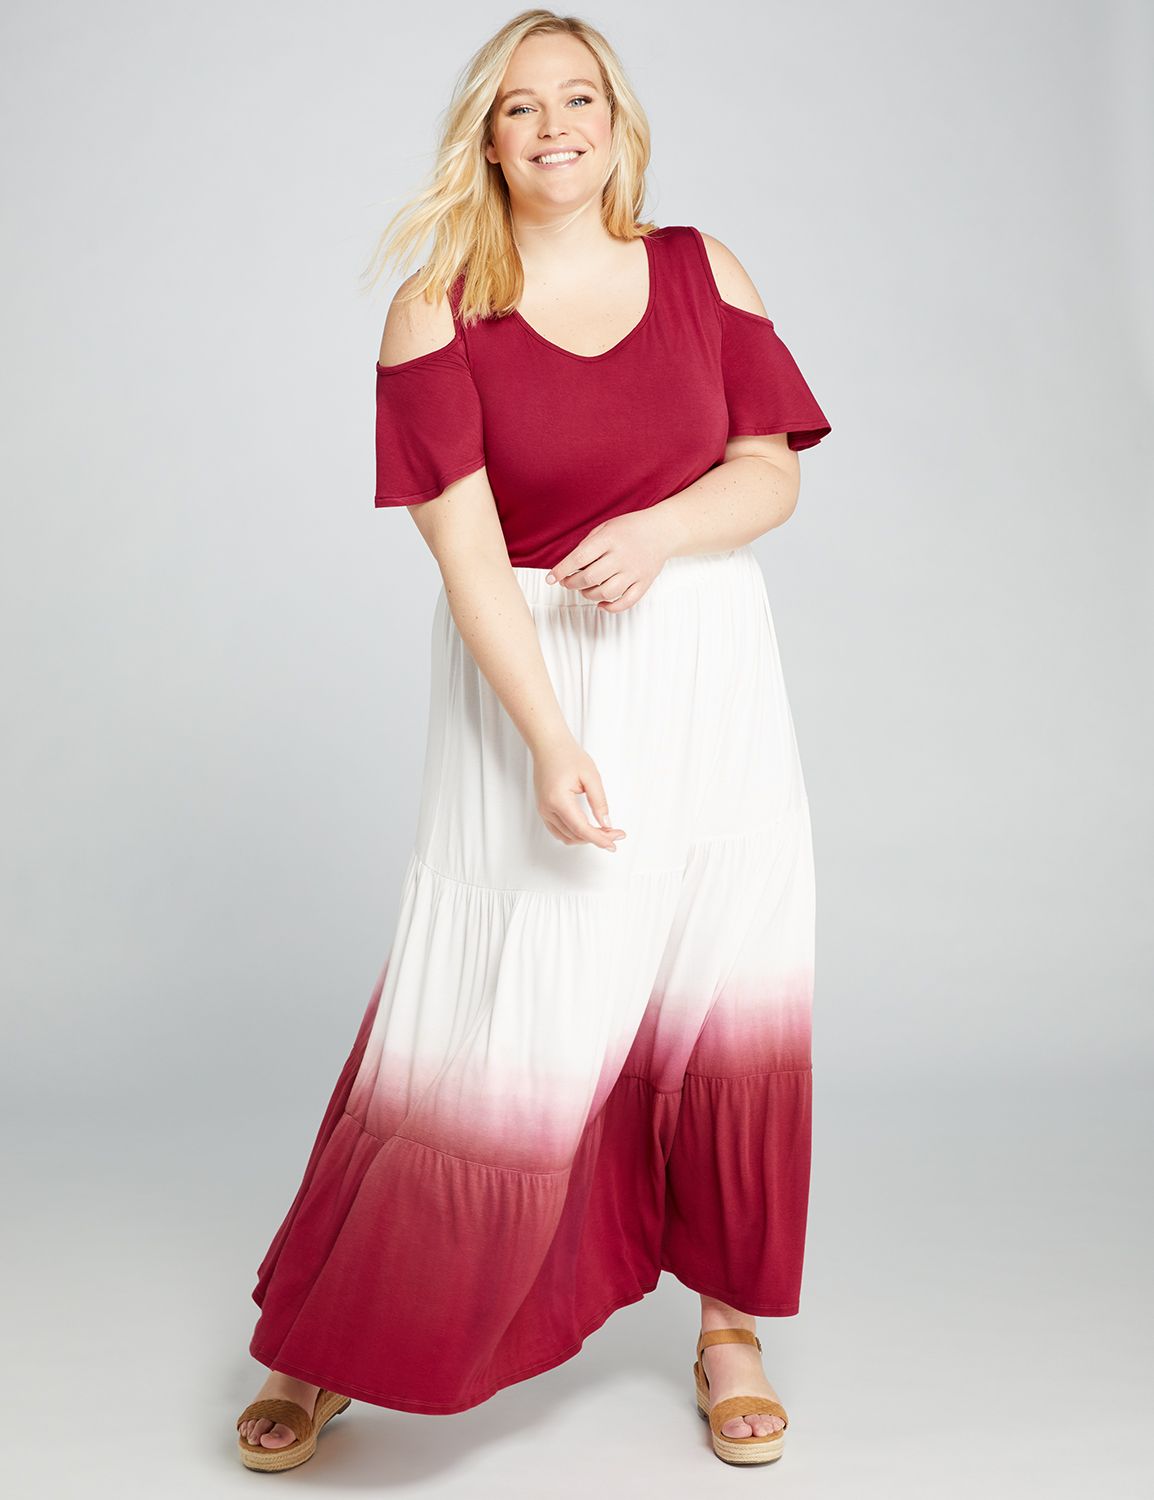 Clearance Plus Size Clothing - On Sale 